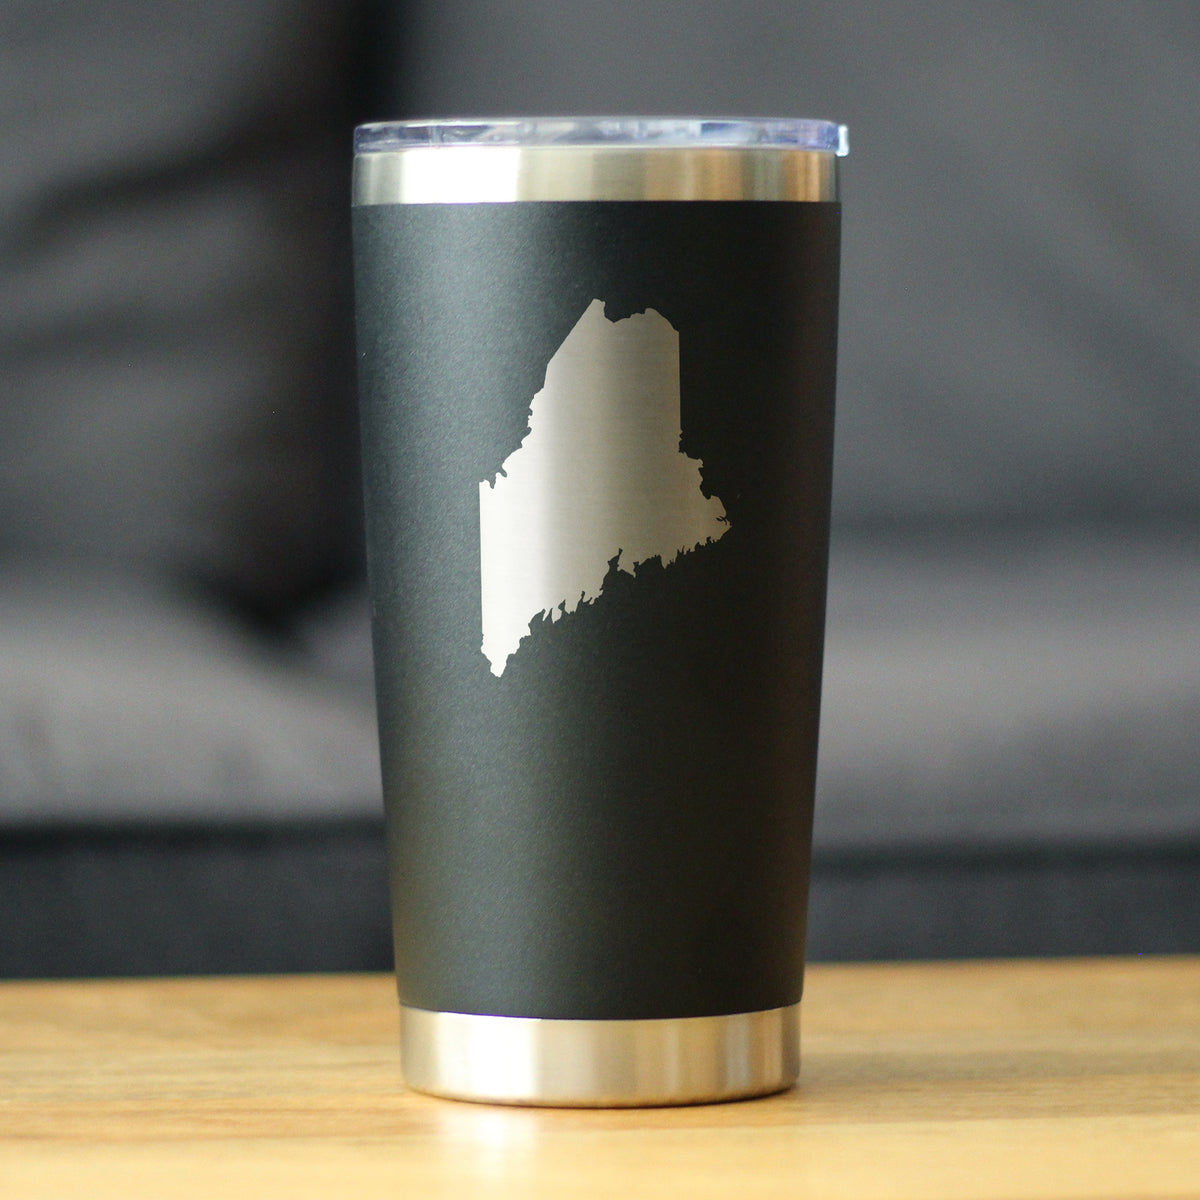 Maine State Outline - Insulated Coffee Tumbler Cup with Sliding Lid - Stainless Steel Travel Mug - Maine Gifts for Women and Men Mainers